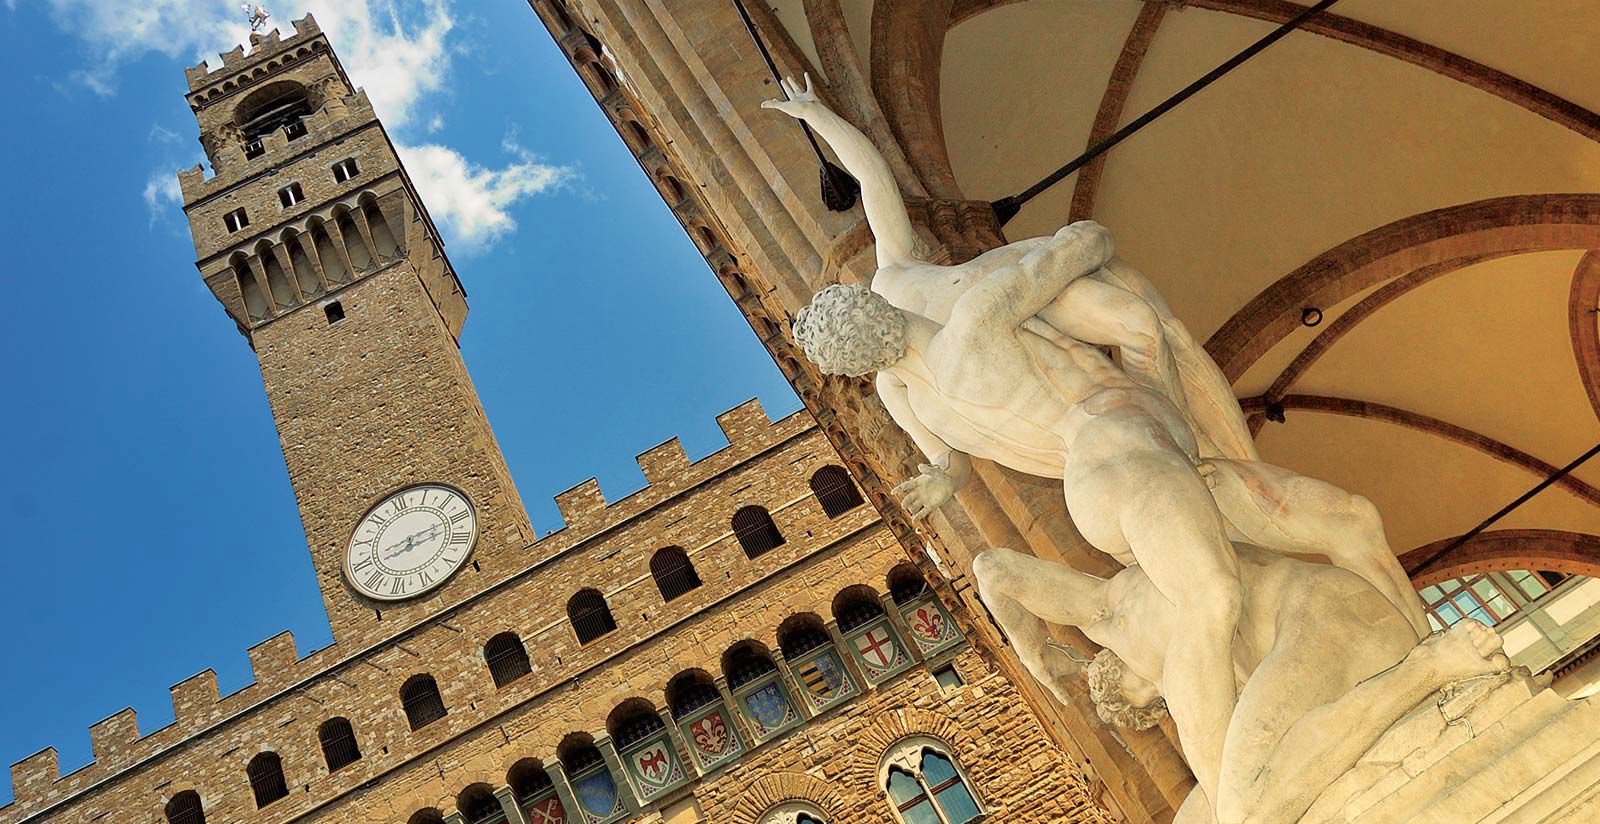 Hotel River & Spa Firenze - Summer Holiday Offers at the River Hotel Florence 5